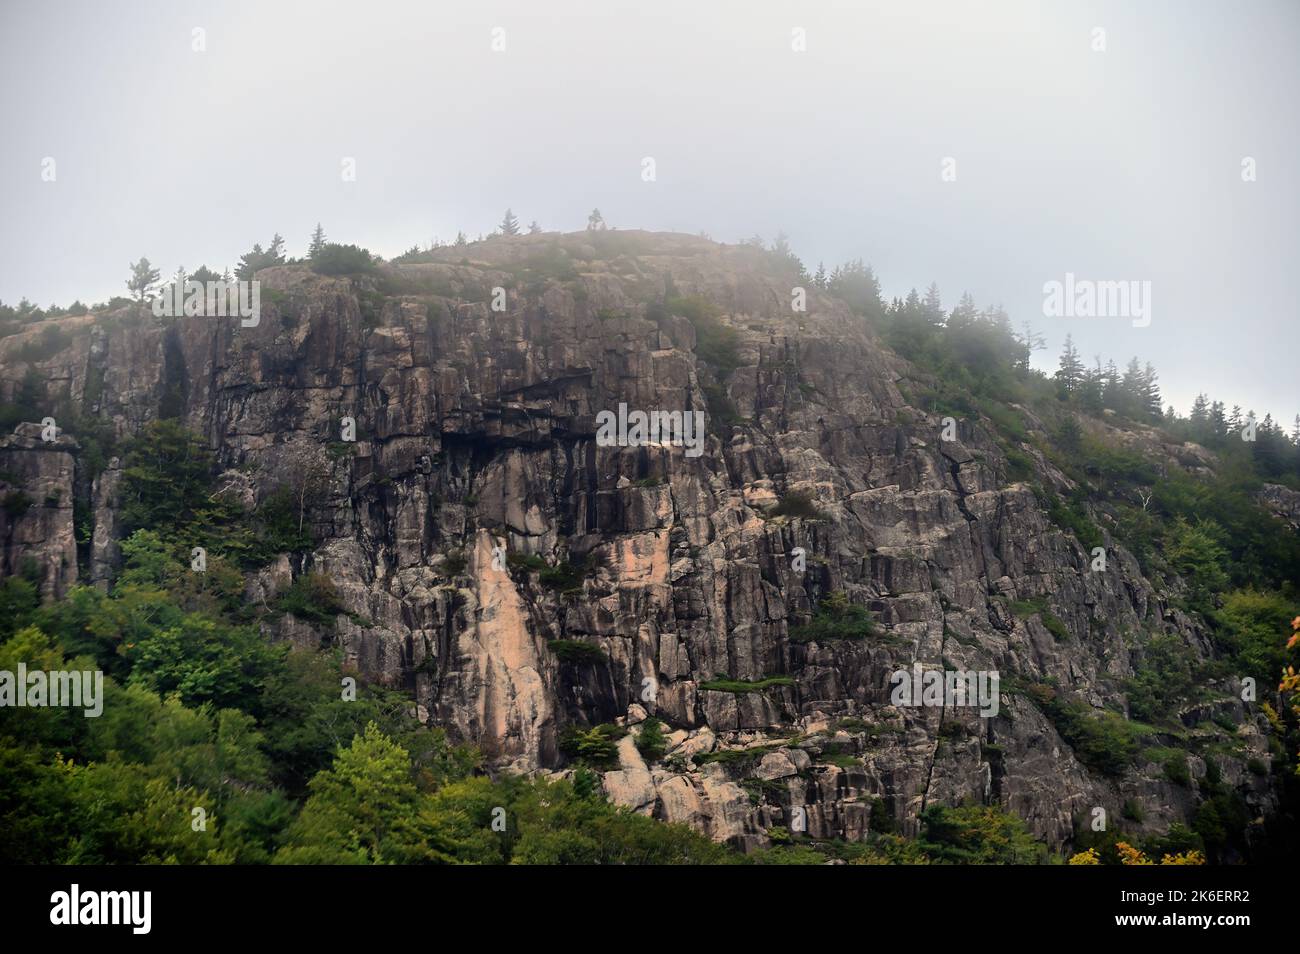 Acadia National Park, Maine, USA. Lingering fog touches the top of a granite dome one of the features that define Acadia National Park. Stock Photo